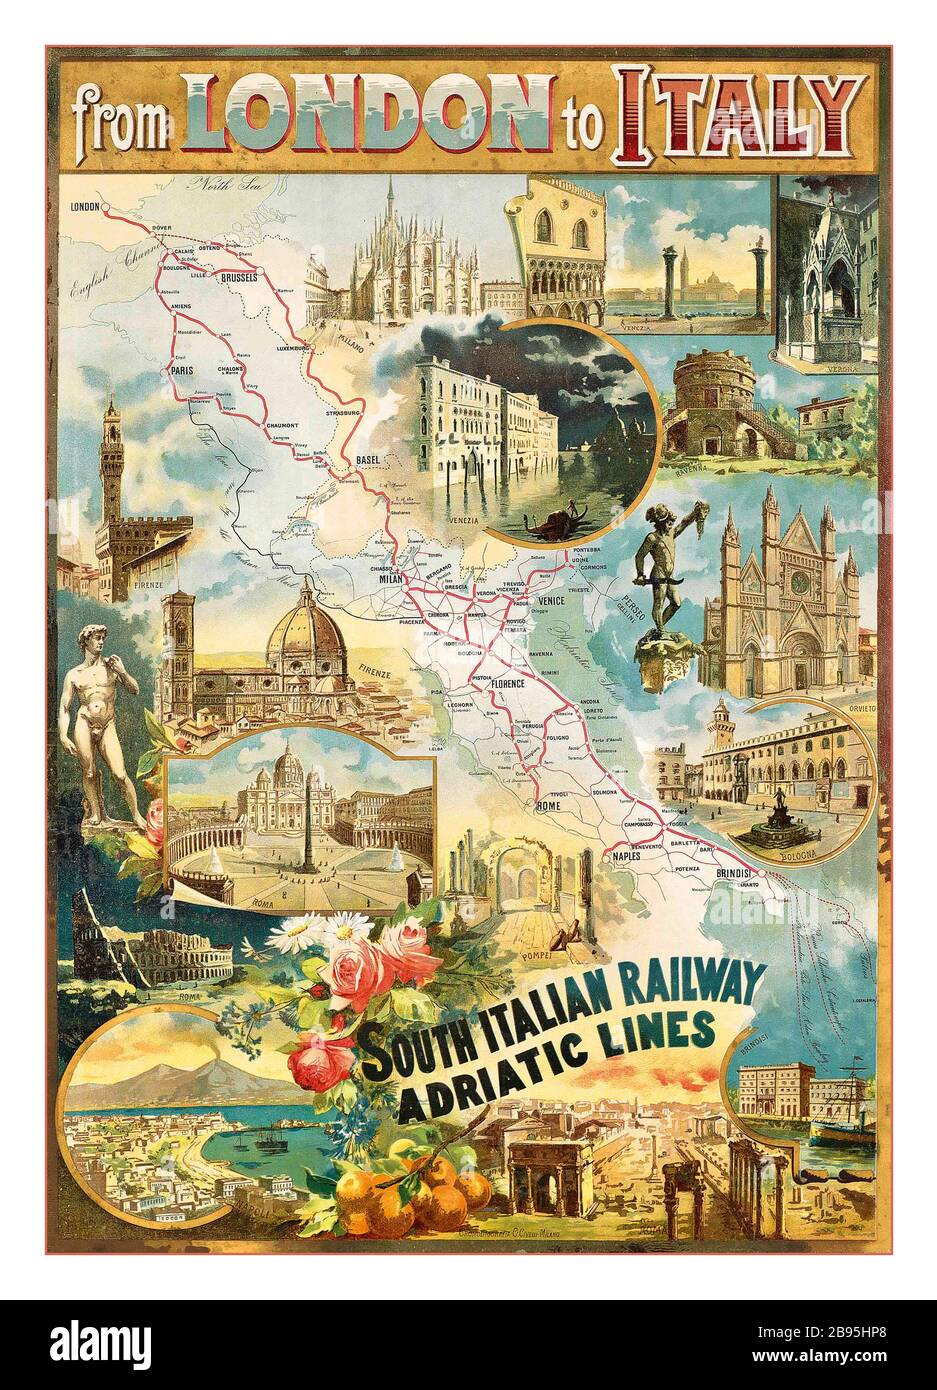 London to Italy 1900's Railway Transport Vintage Travel Poster 1900s FROM LONDON TO ITALY with South Italian Railway Adriatic Lines lithograph in colour, printed by G.Civelli, Milano, Stock Photo